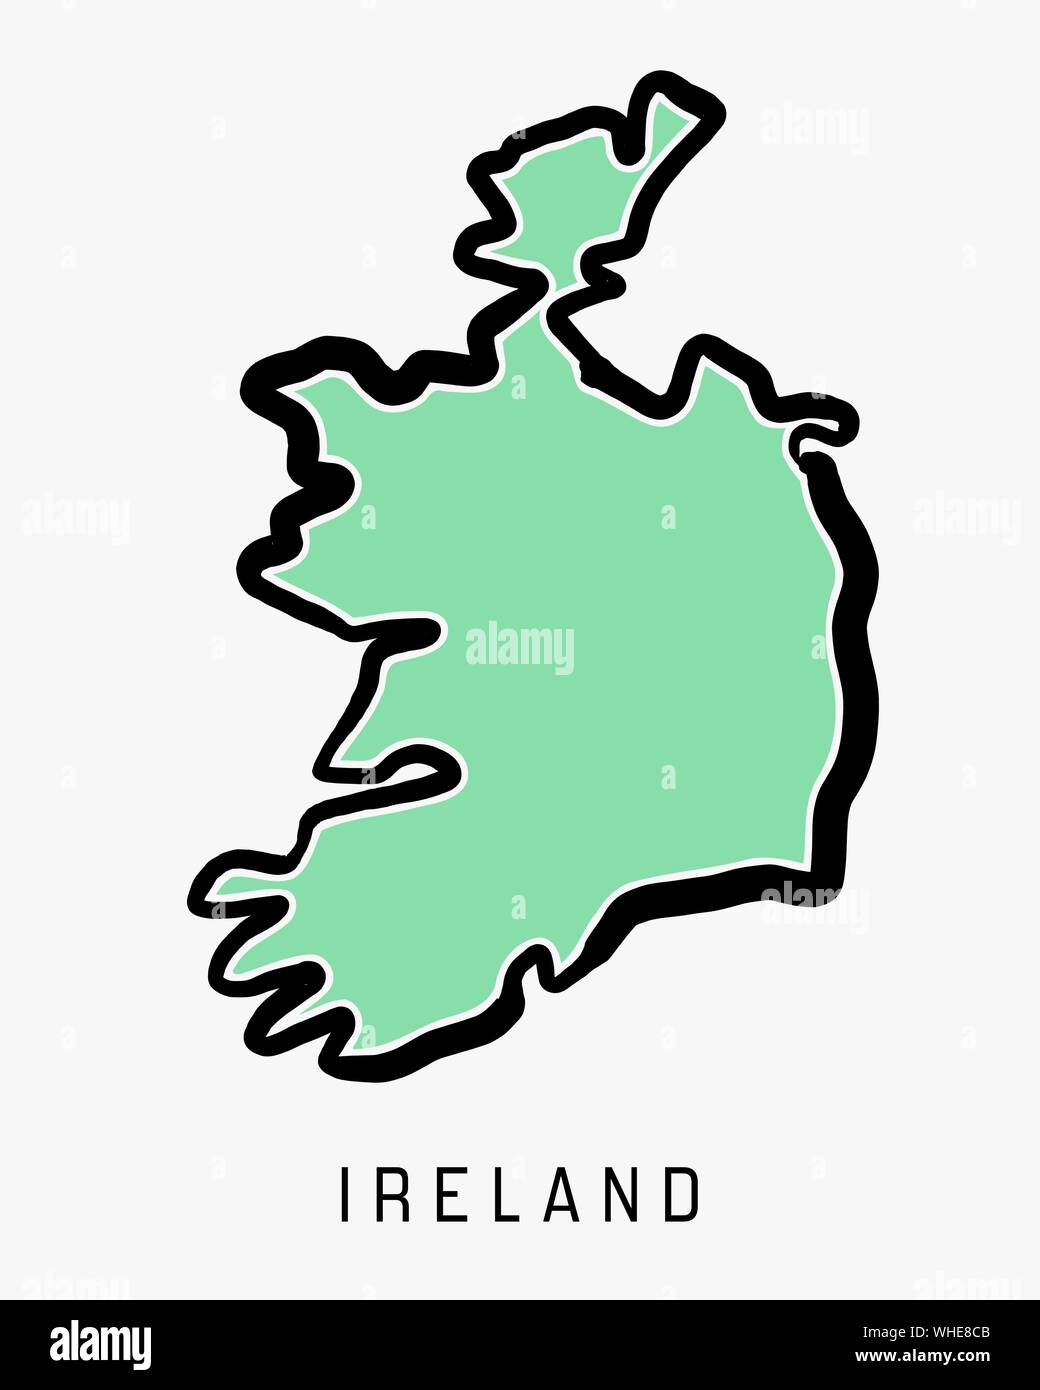 Ireland simple map outline - simplified country shape map vector. Stock Vector